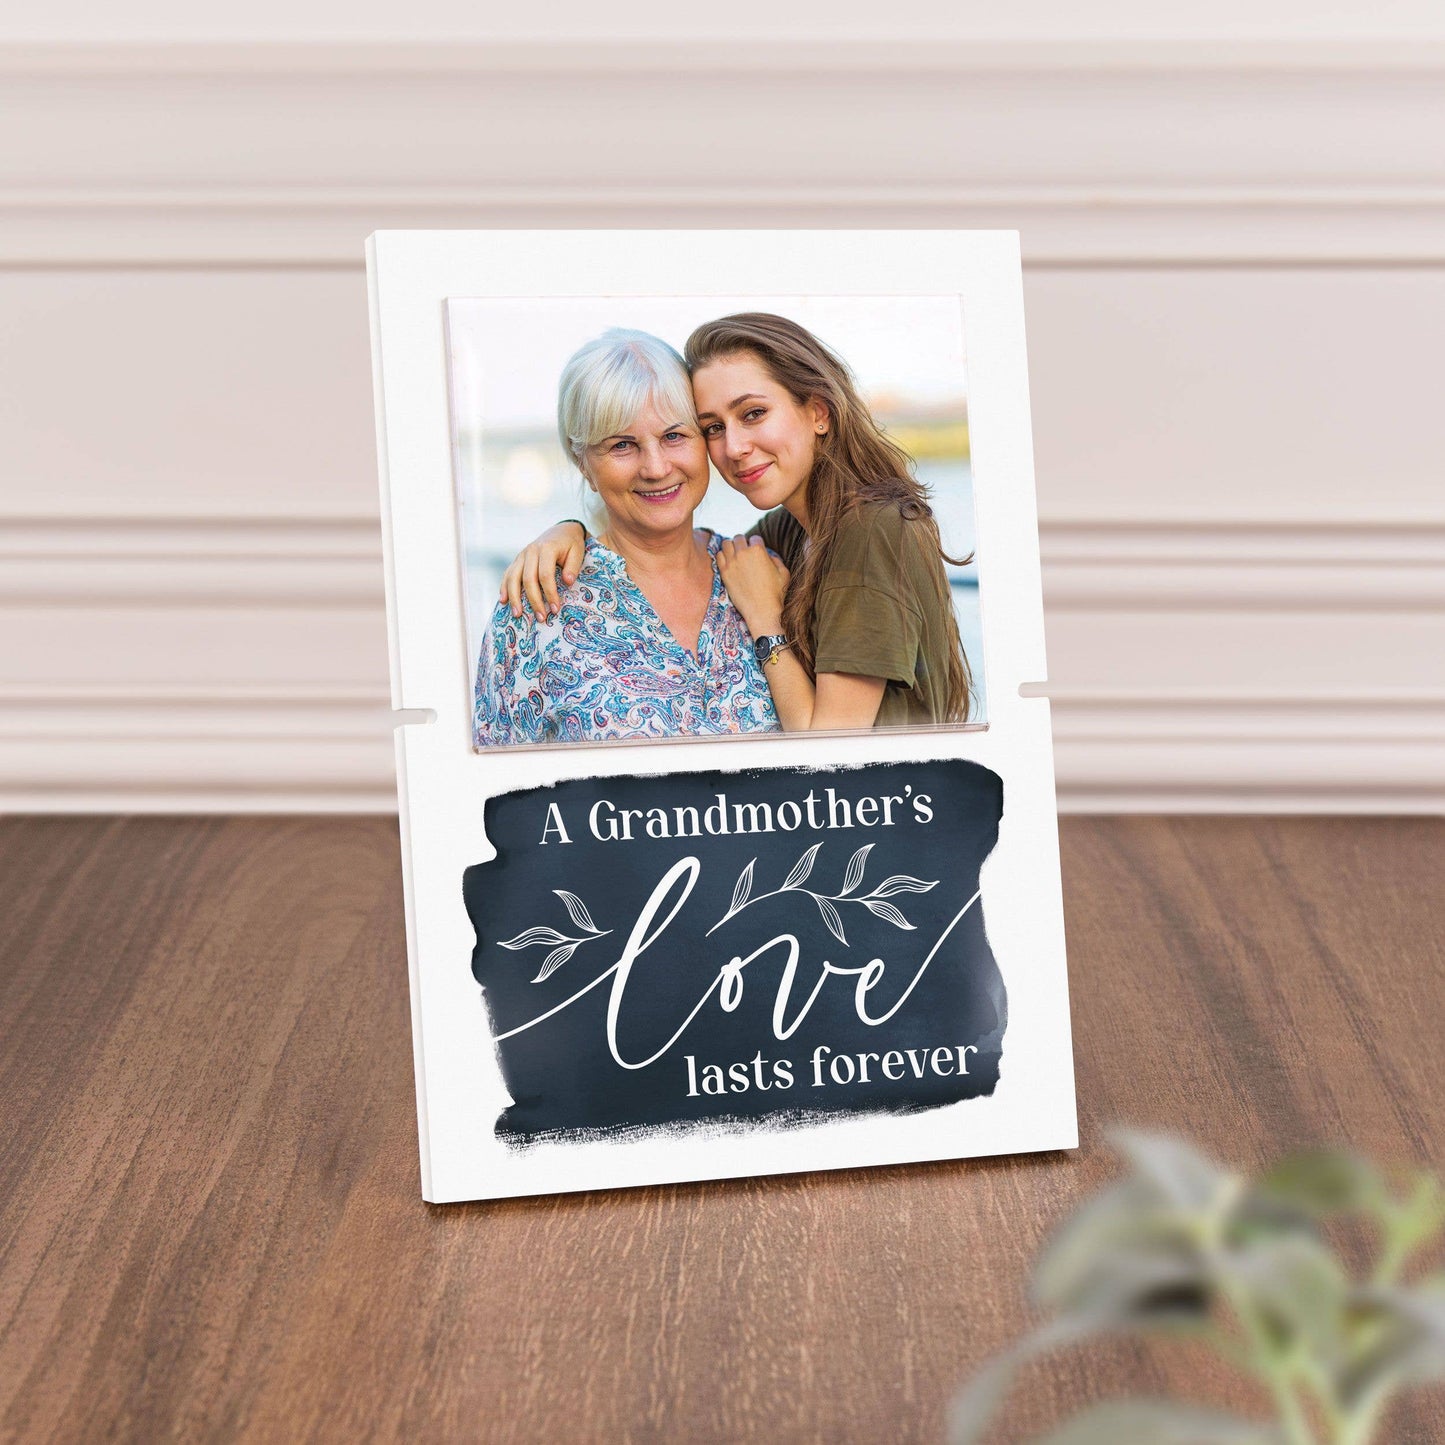 A Grandmother's Love Lasts Forever Story Board